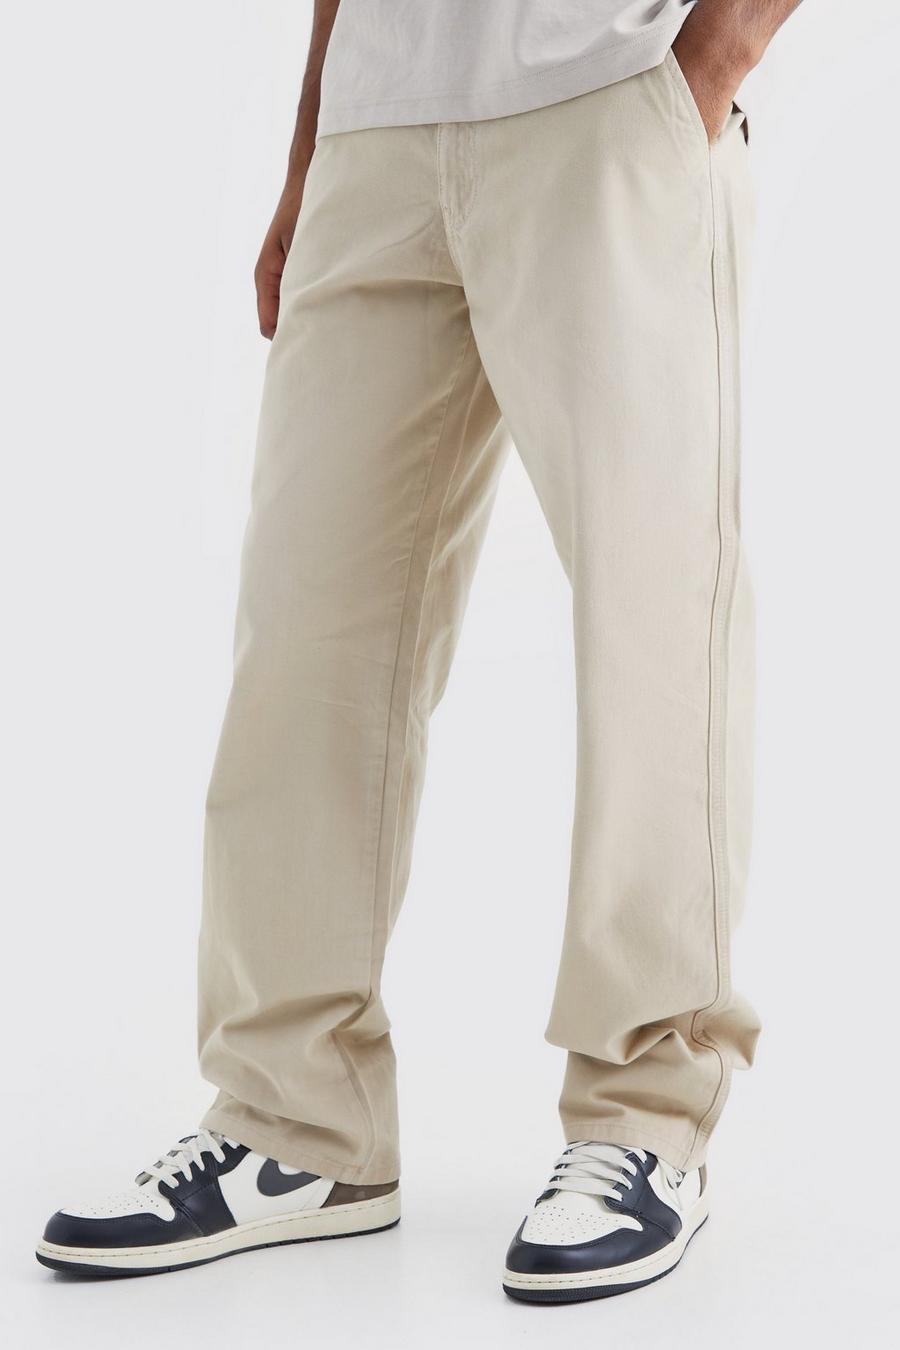 Stone Tall Relaxed Chino Pants